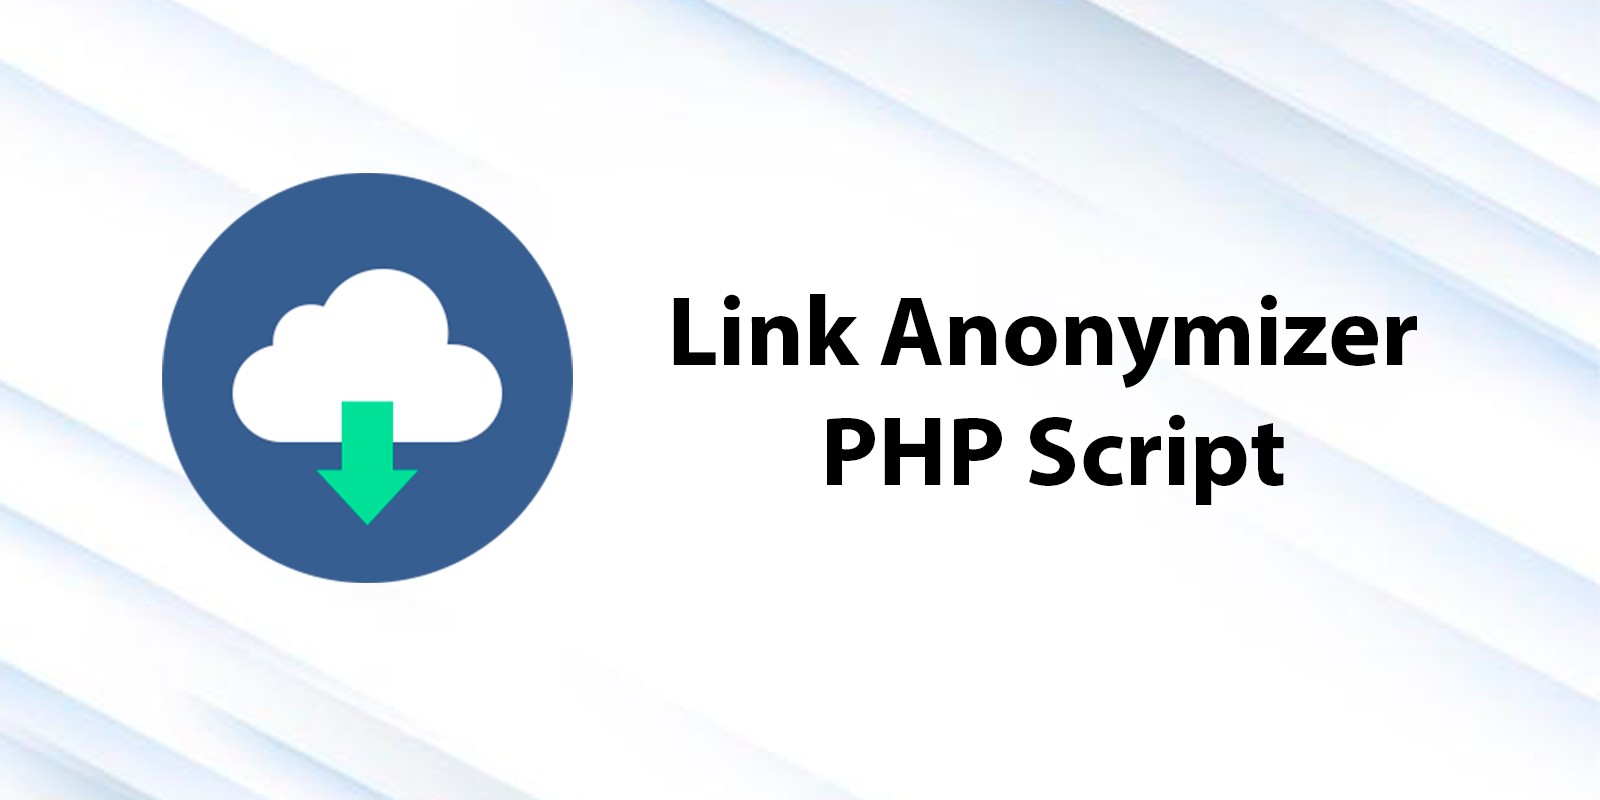 Link Anonymizer Script